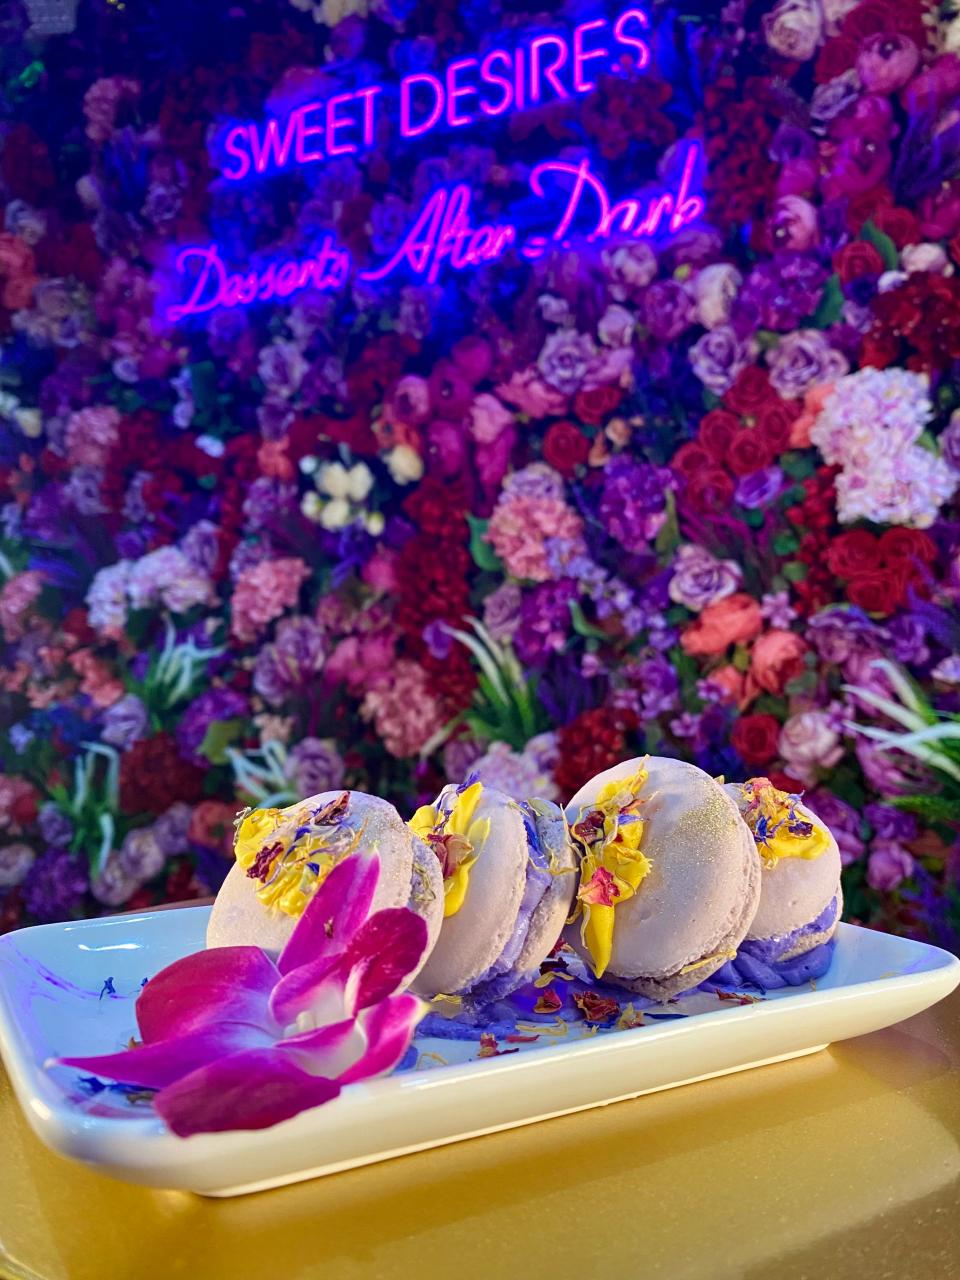 The new dessert lounge features its signature macarons on its menu.